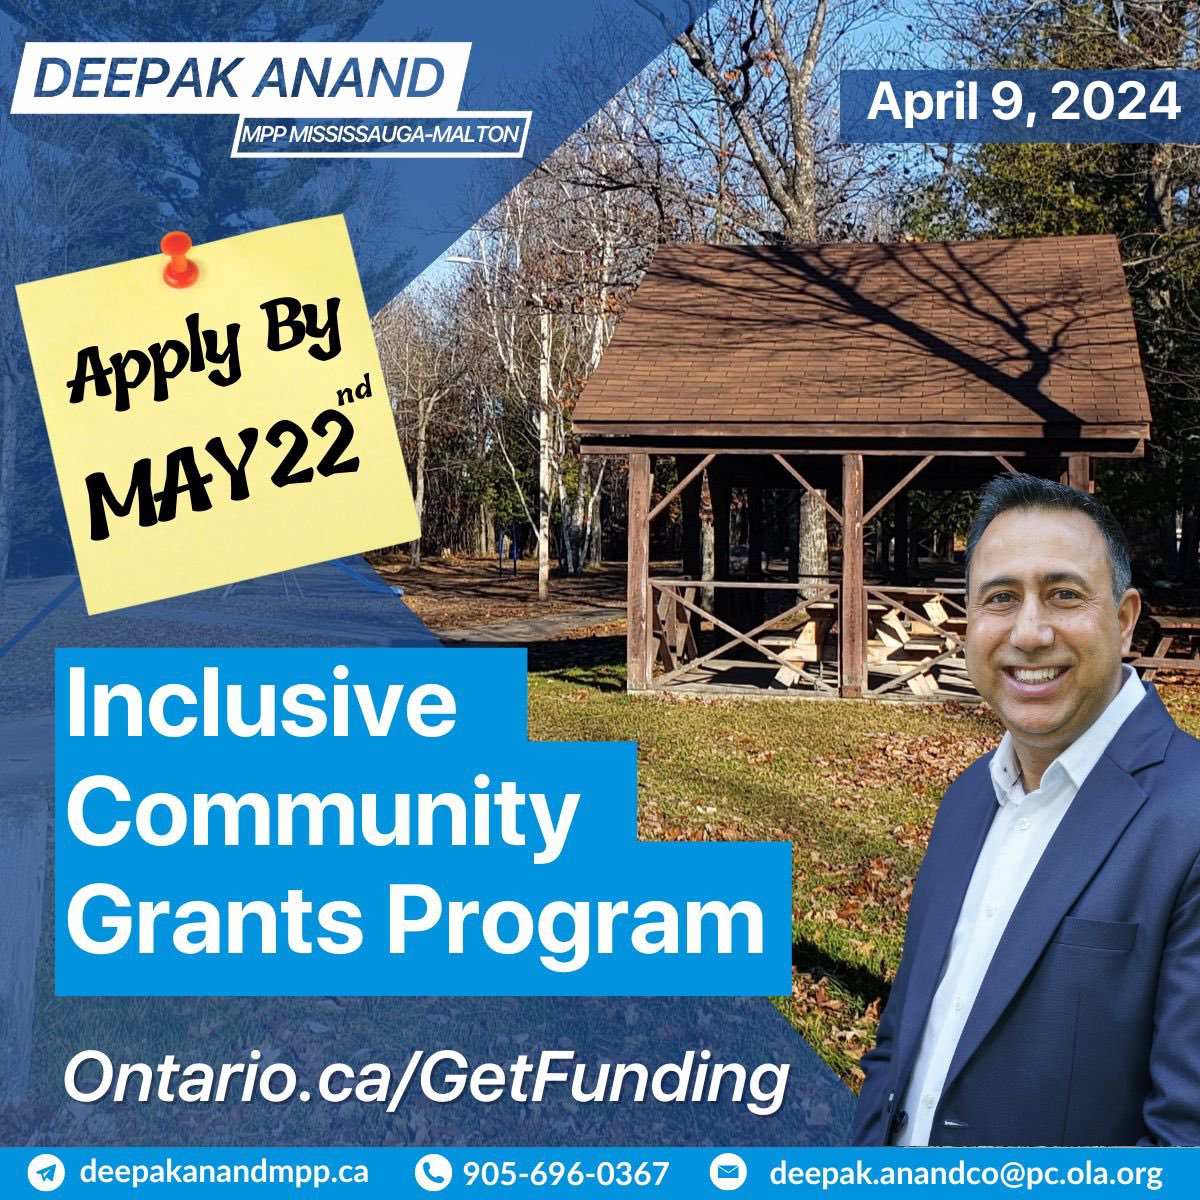 #Nonprofits can now apply for up to $60,000 for projects that’ll help seniors & ppl with different abilities to participate in community life. This year's focus is on increasing access to outdoor spaces & promoting accessible housing & transportation. bit.ly/ON-Inclusive